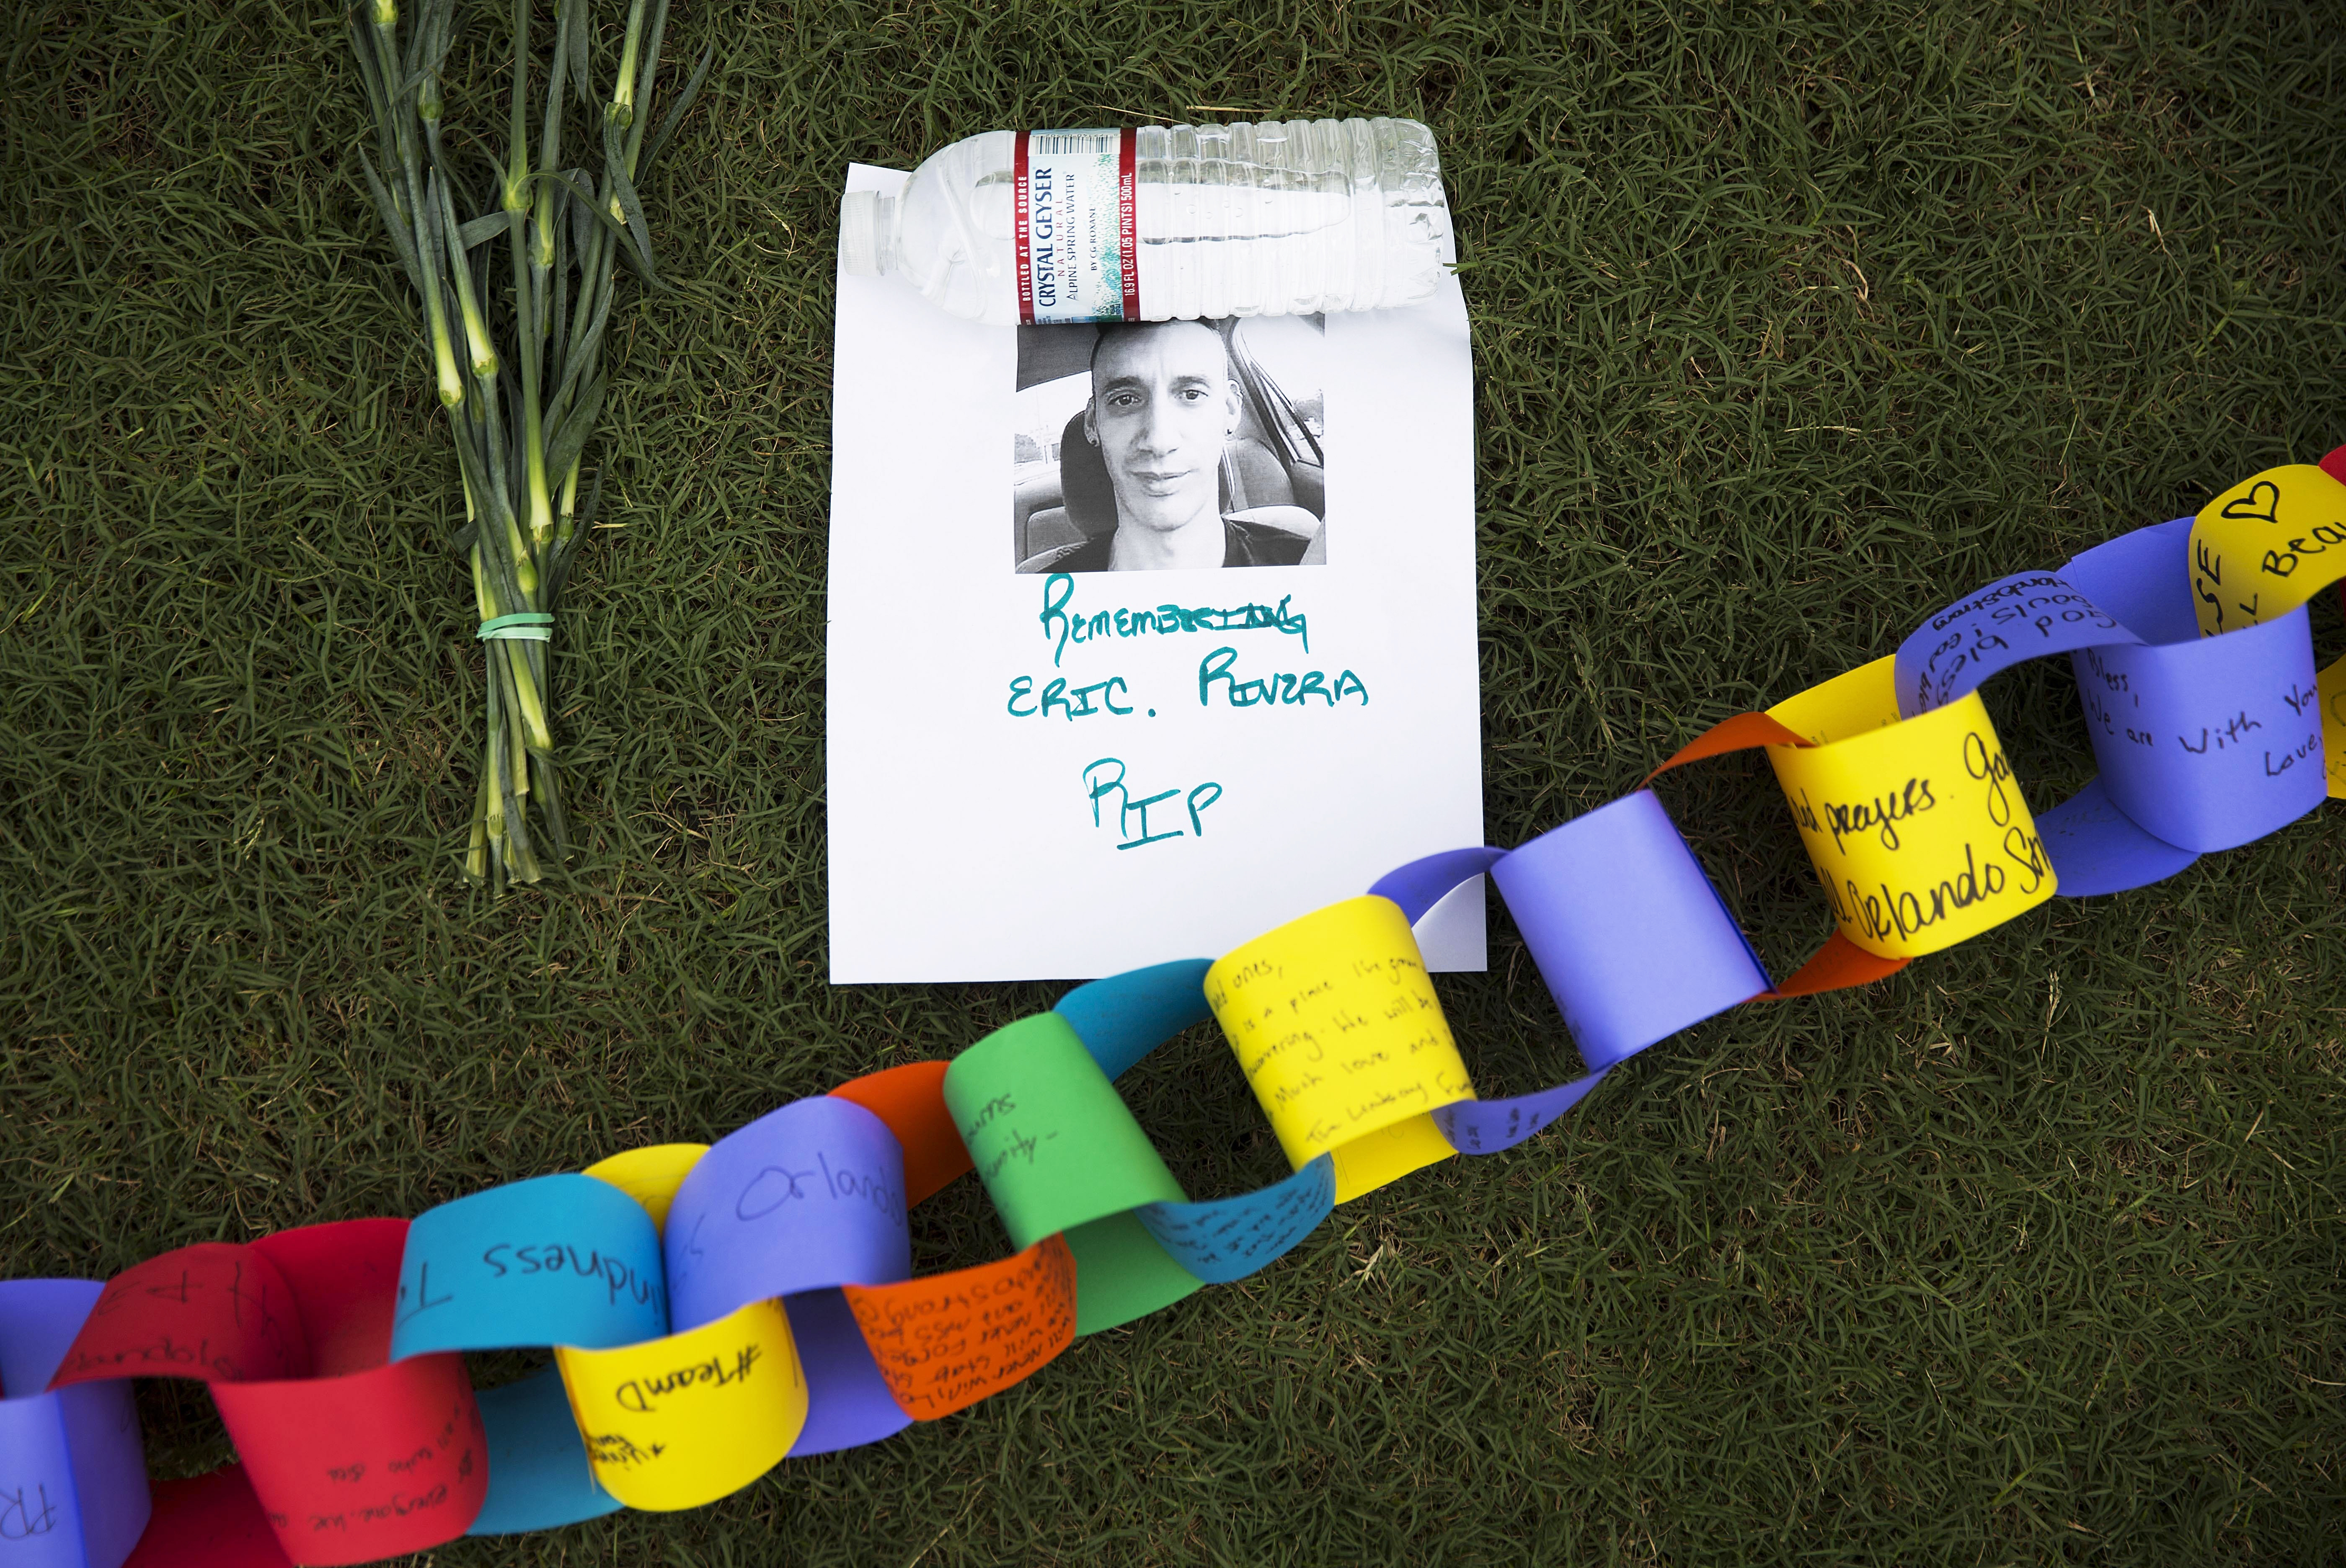 A remembrance for Eric Rivera, killed in the mass shooting at the Pulse nightclub, sits amongst a makeshift memorial for the victims in Orlando, Fla., on June 13, 2016.